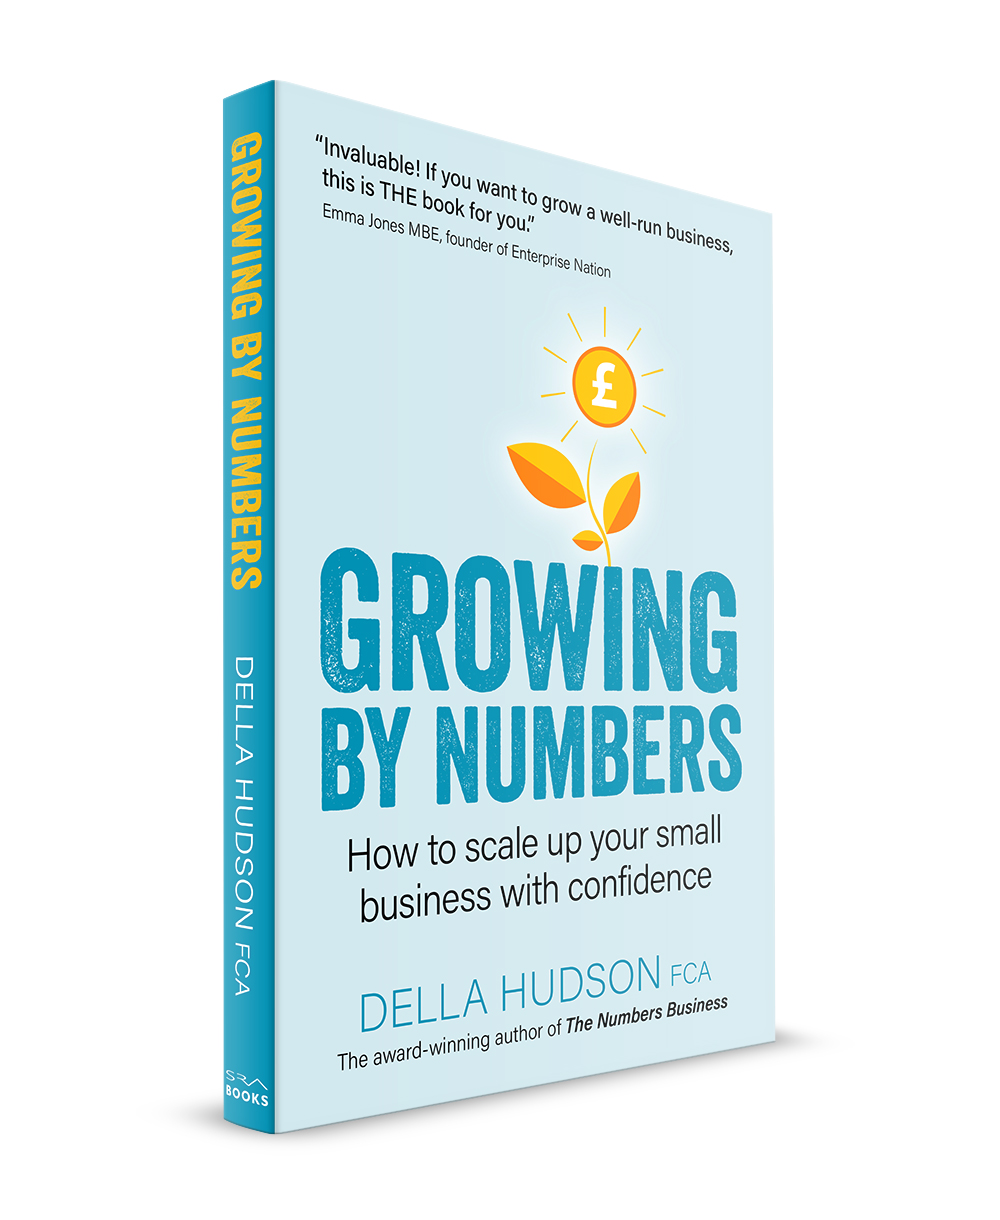 Growing by Numbers: how to scale up your small business with confidence